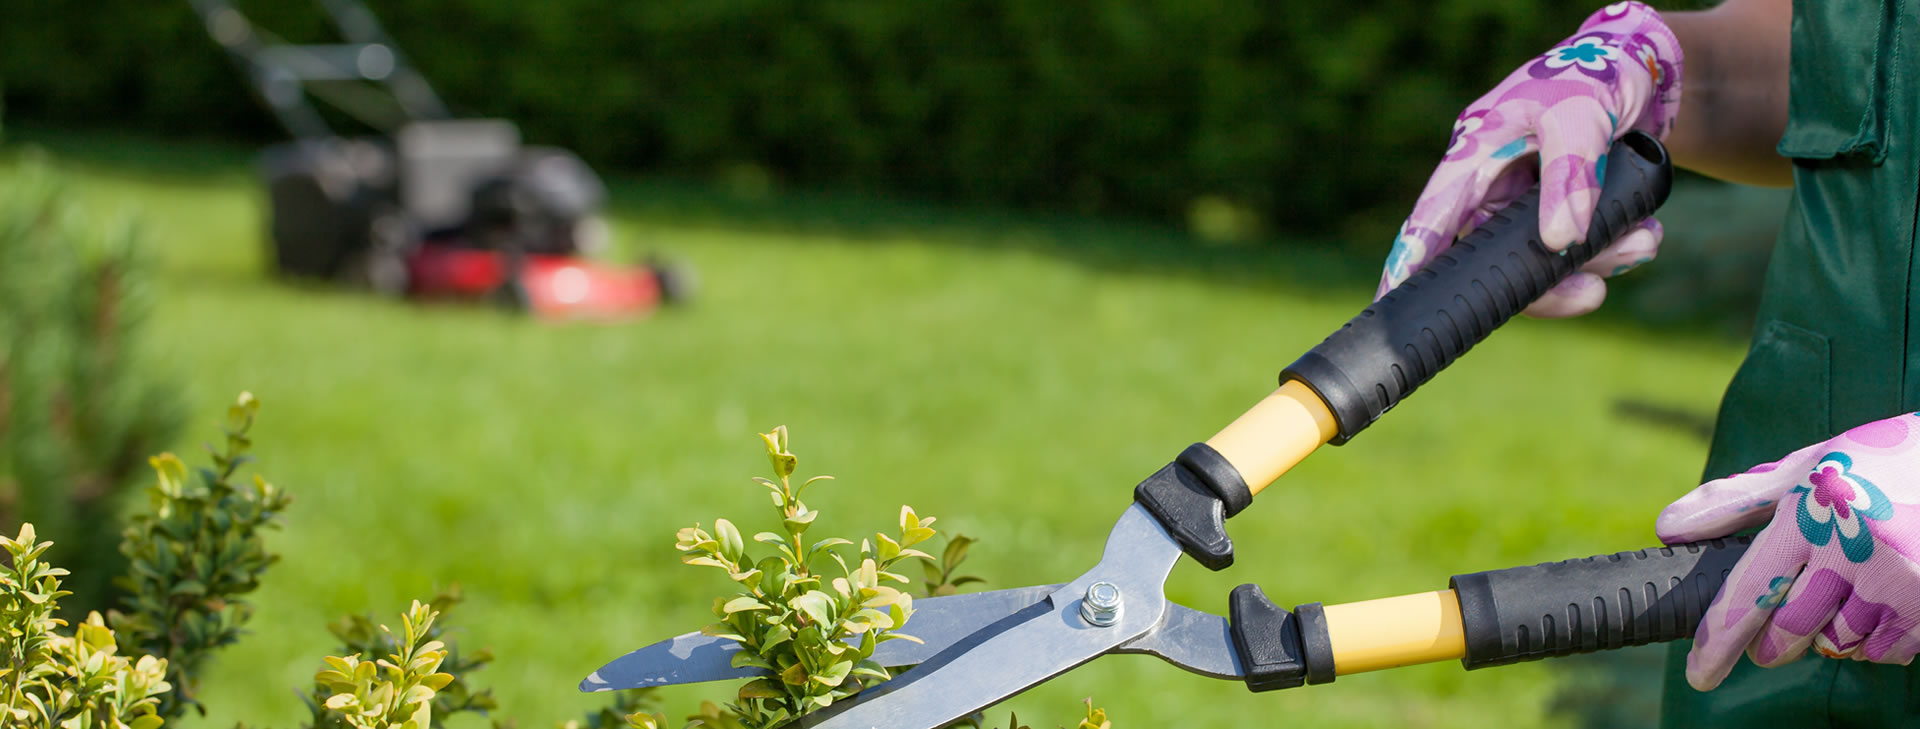 Professional and Quality Garden & Property Services